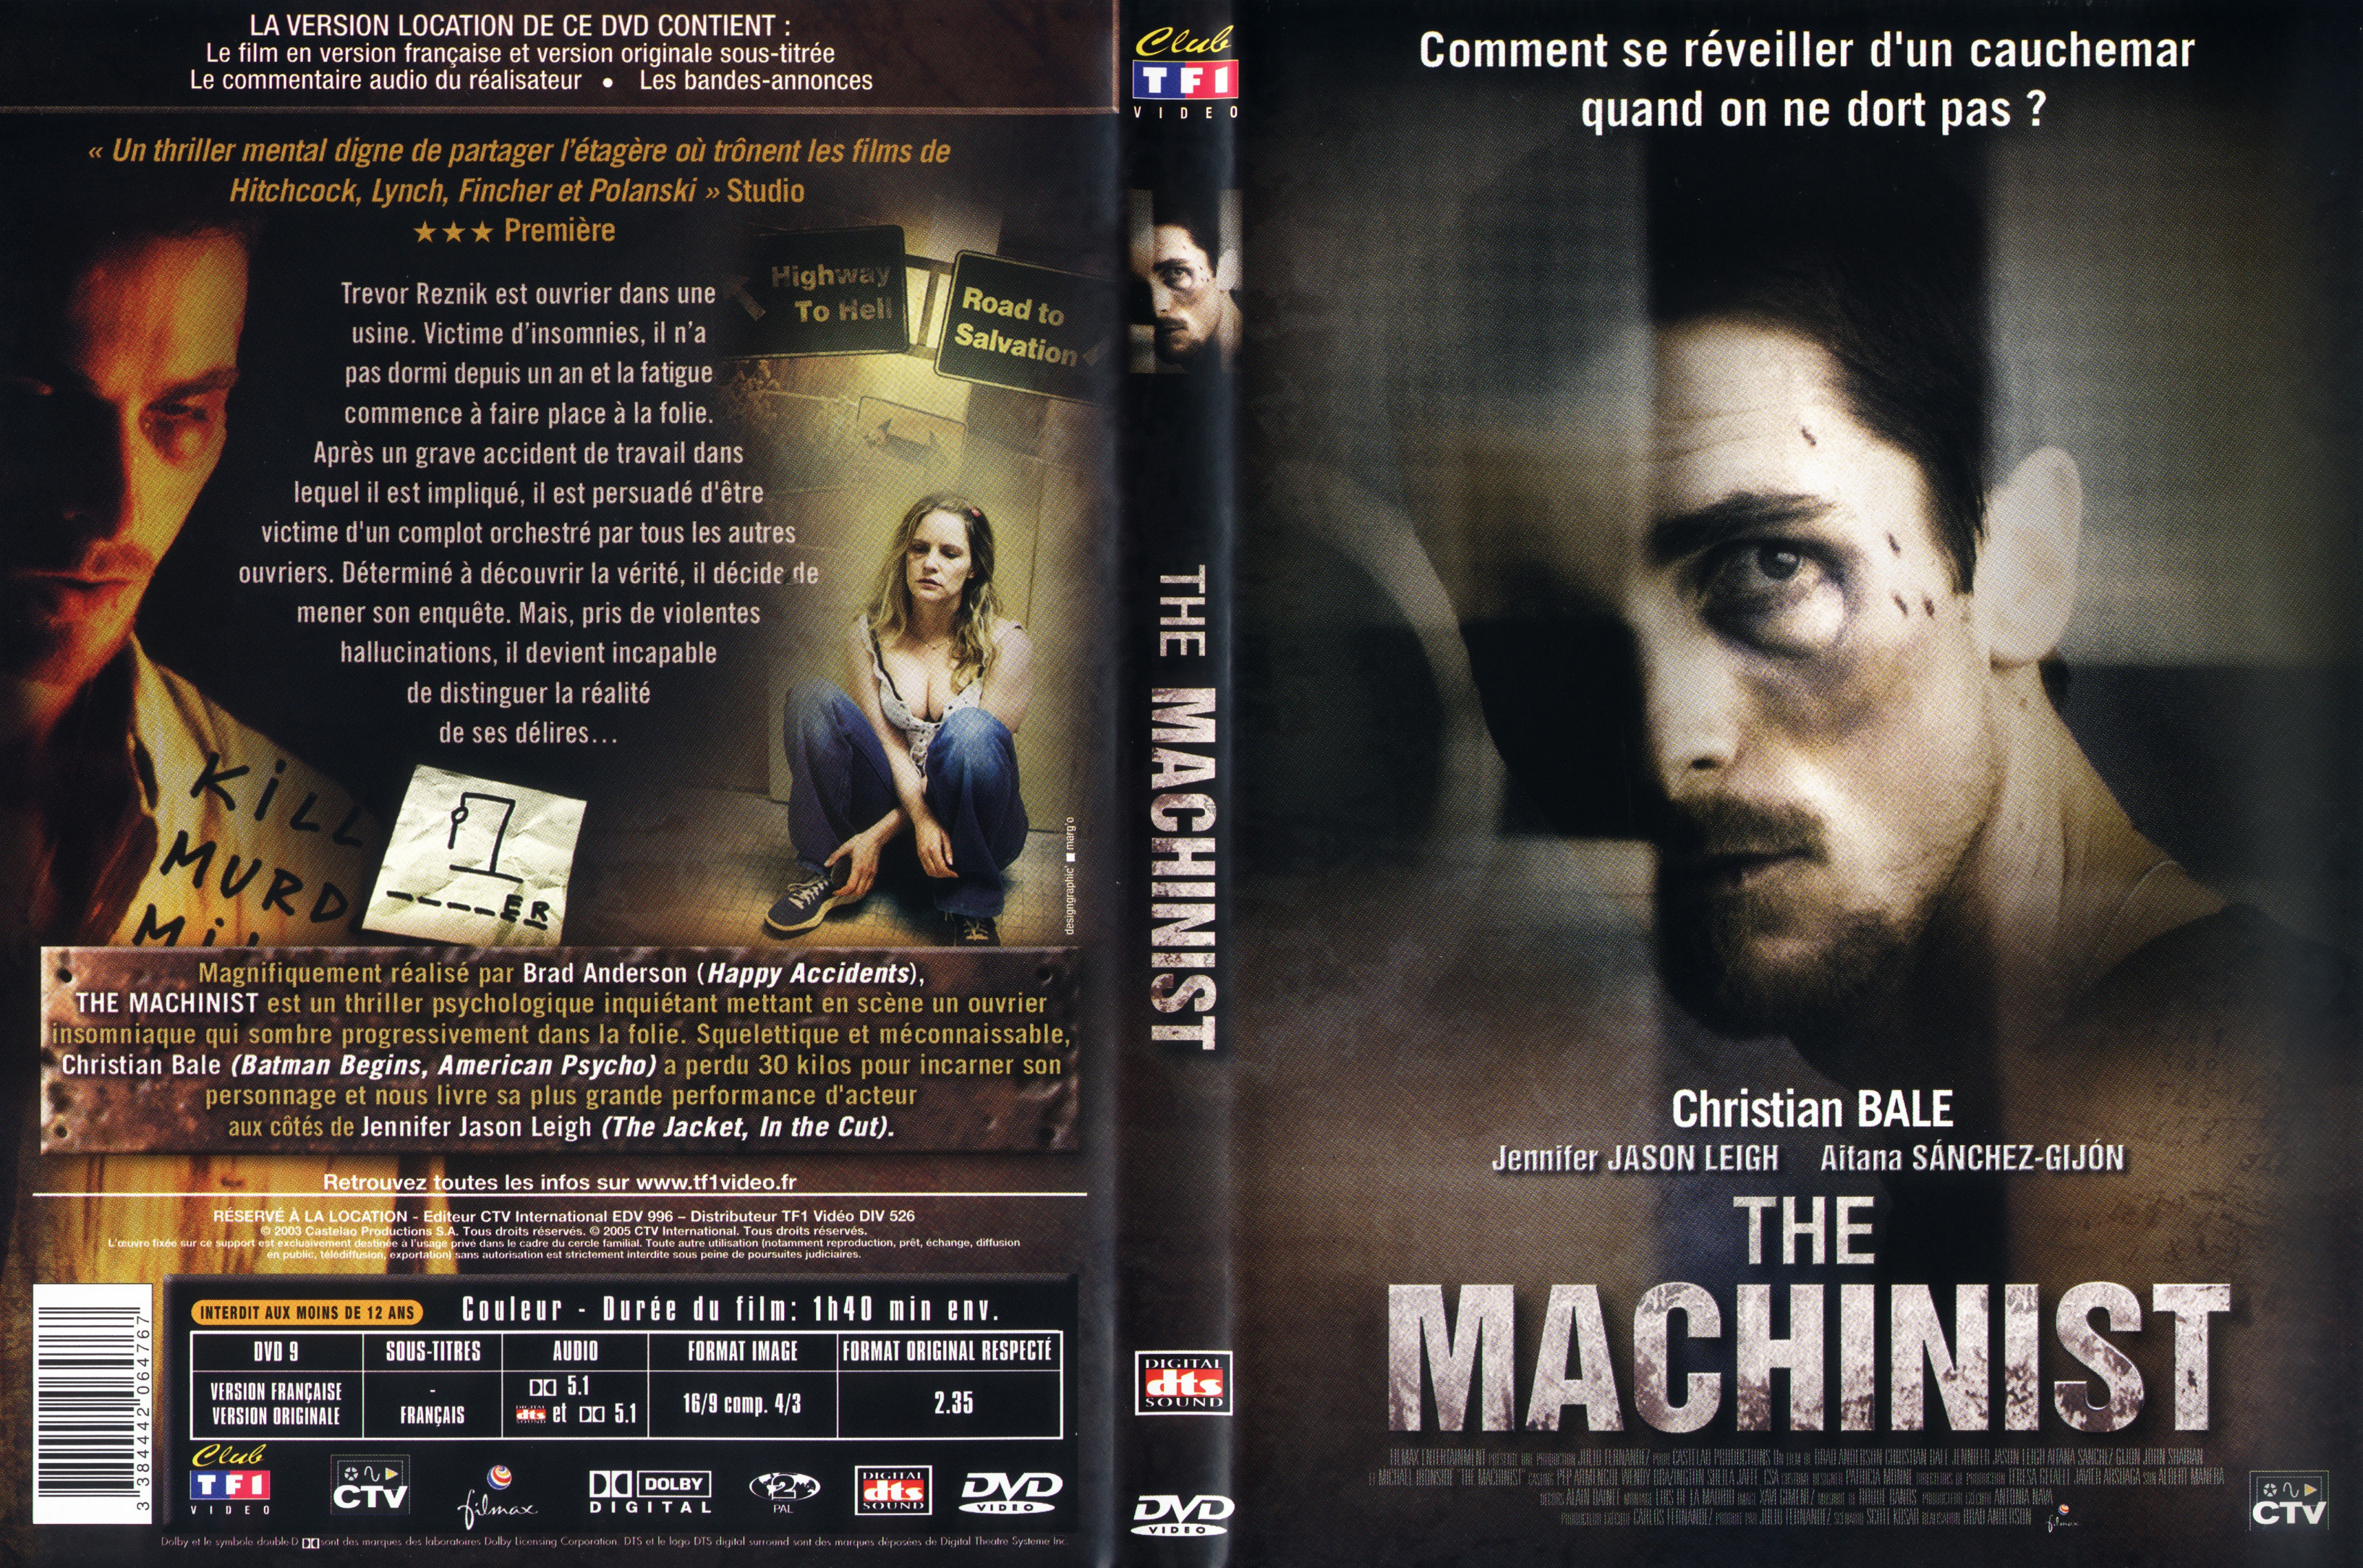 Jaquette DVD The Machinist v2